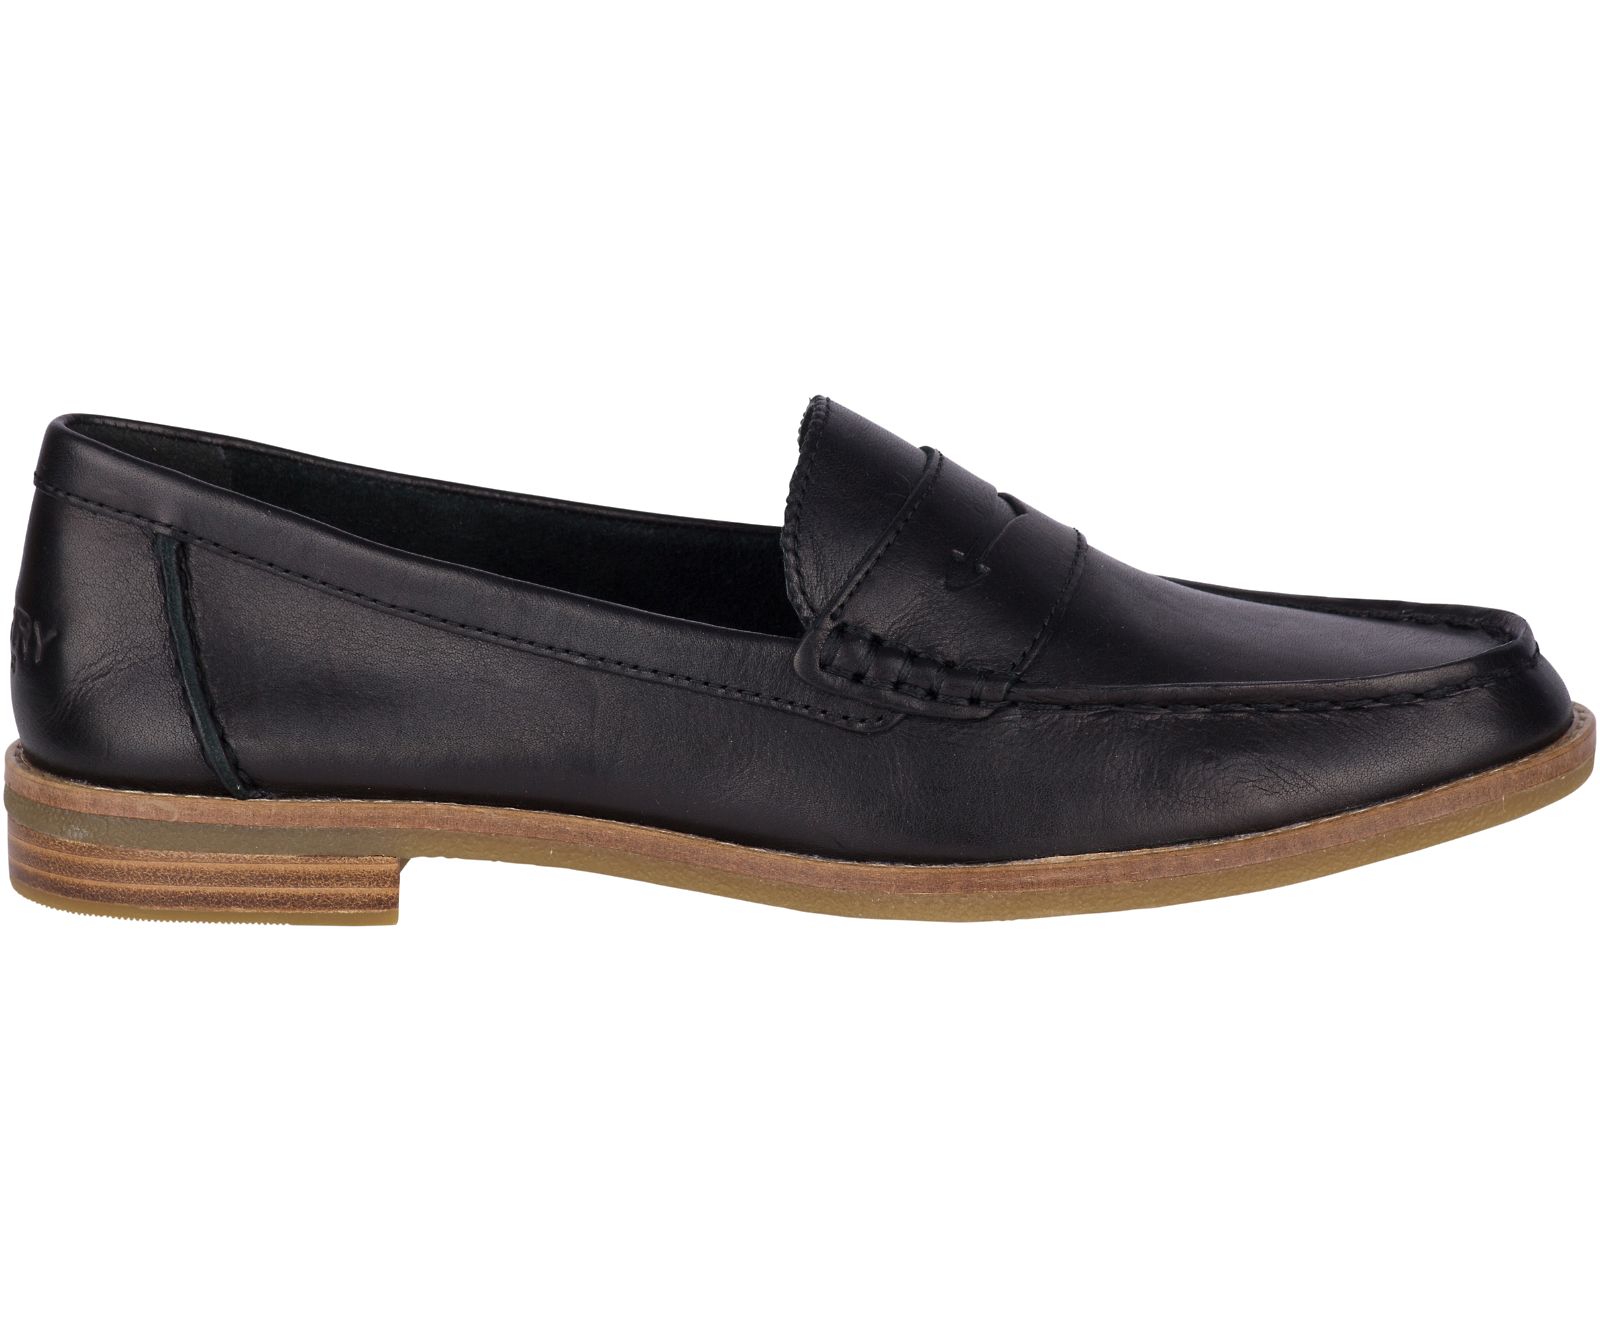 Women's Seaport Penny Loafer - Black [sperry shoes 0858] - $42.00 ...